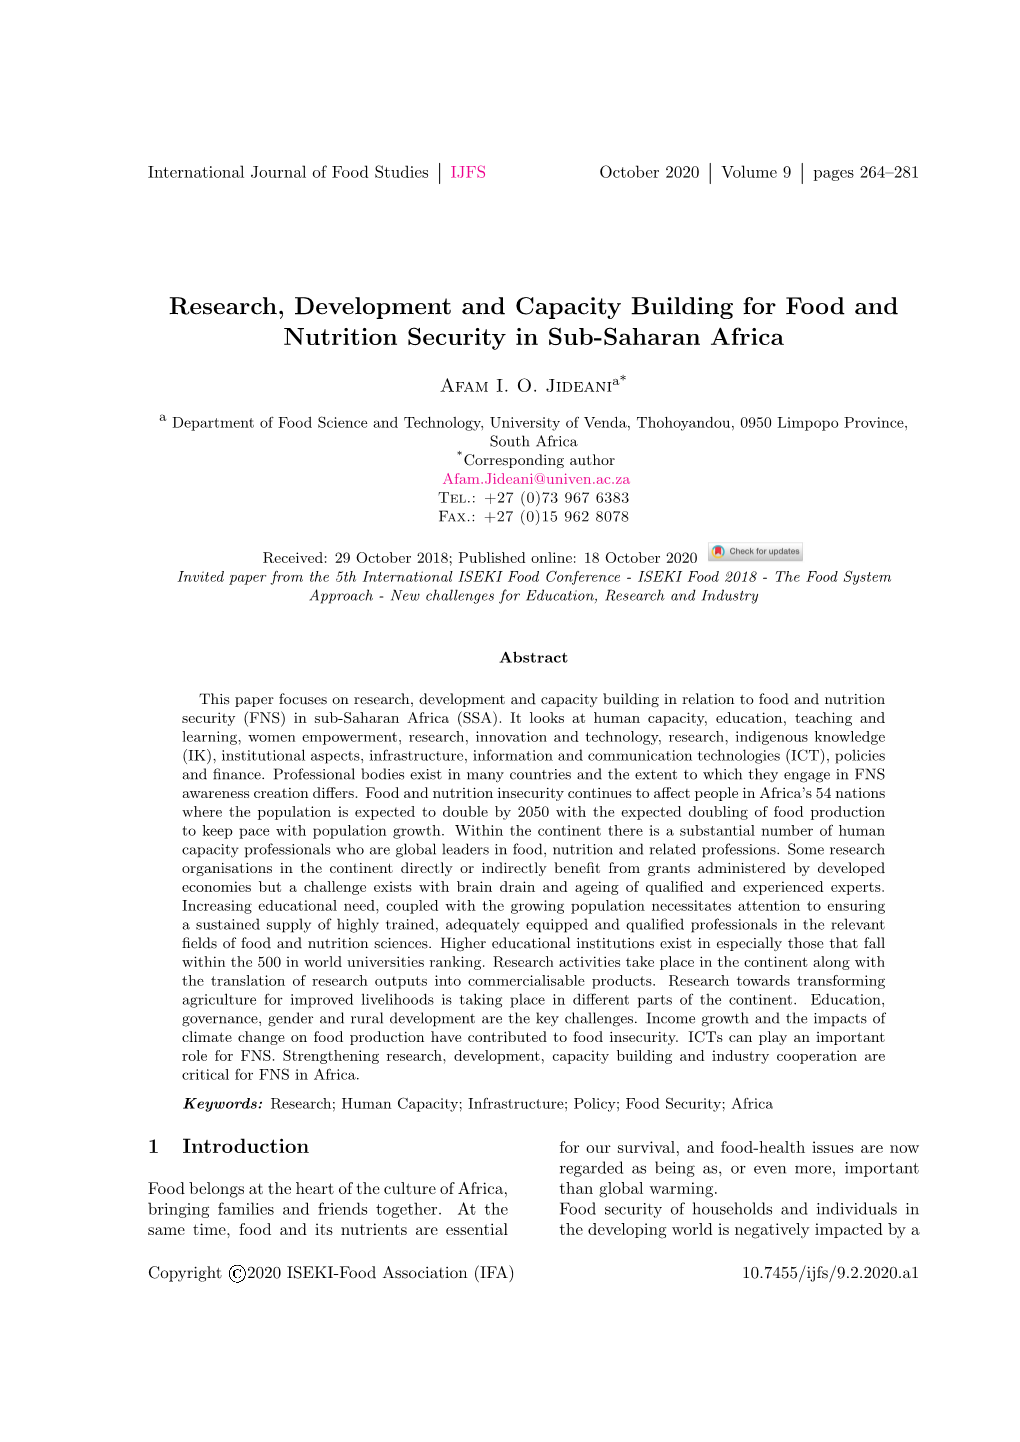 Research, Development and Capacity Building for Food and Nutrition Security in Sub-Saharan Africa